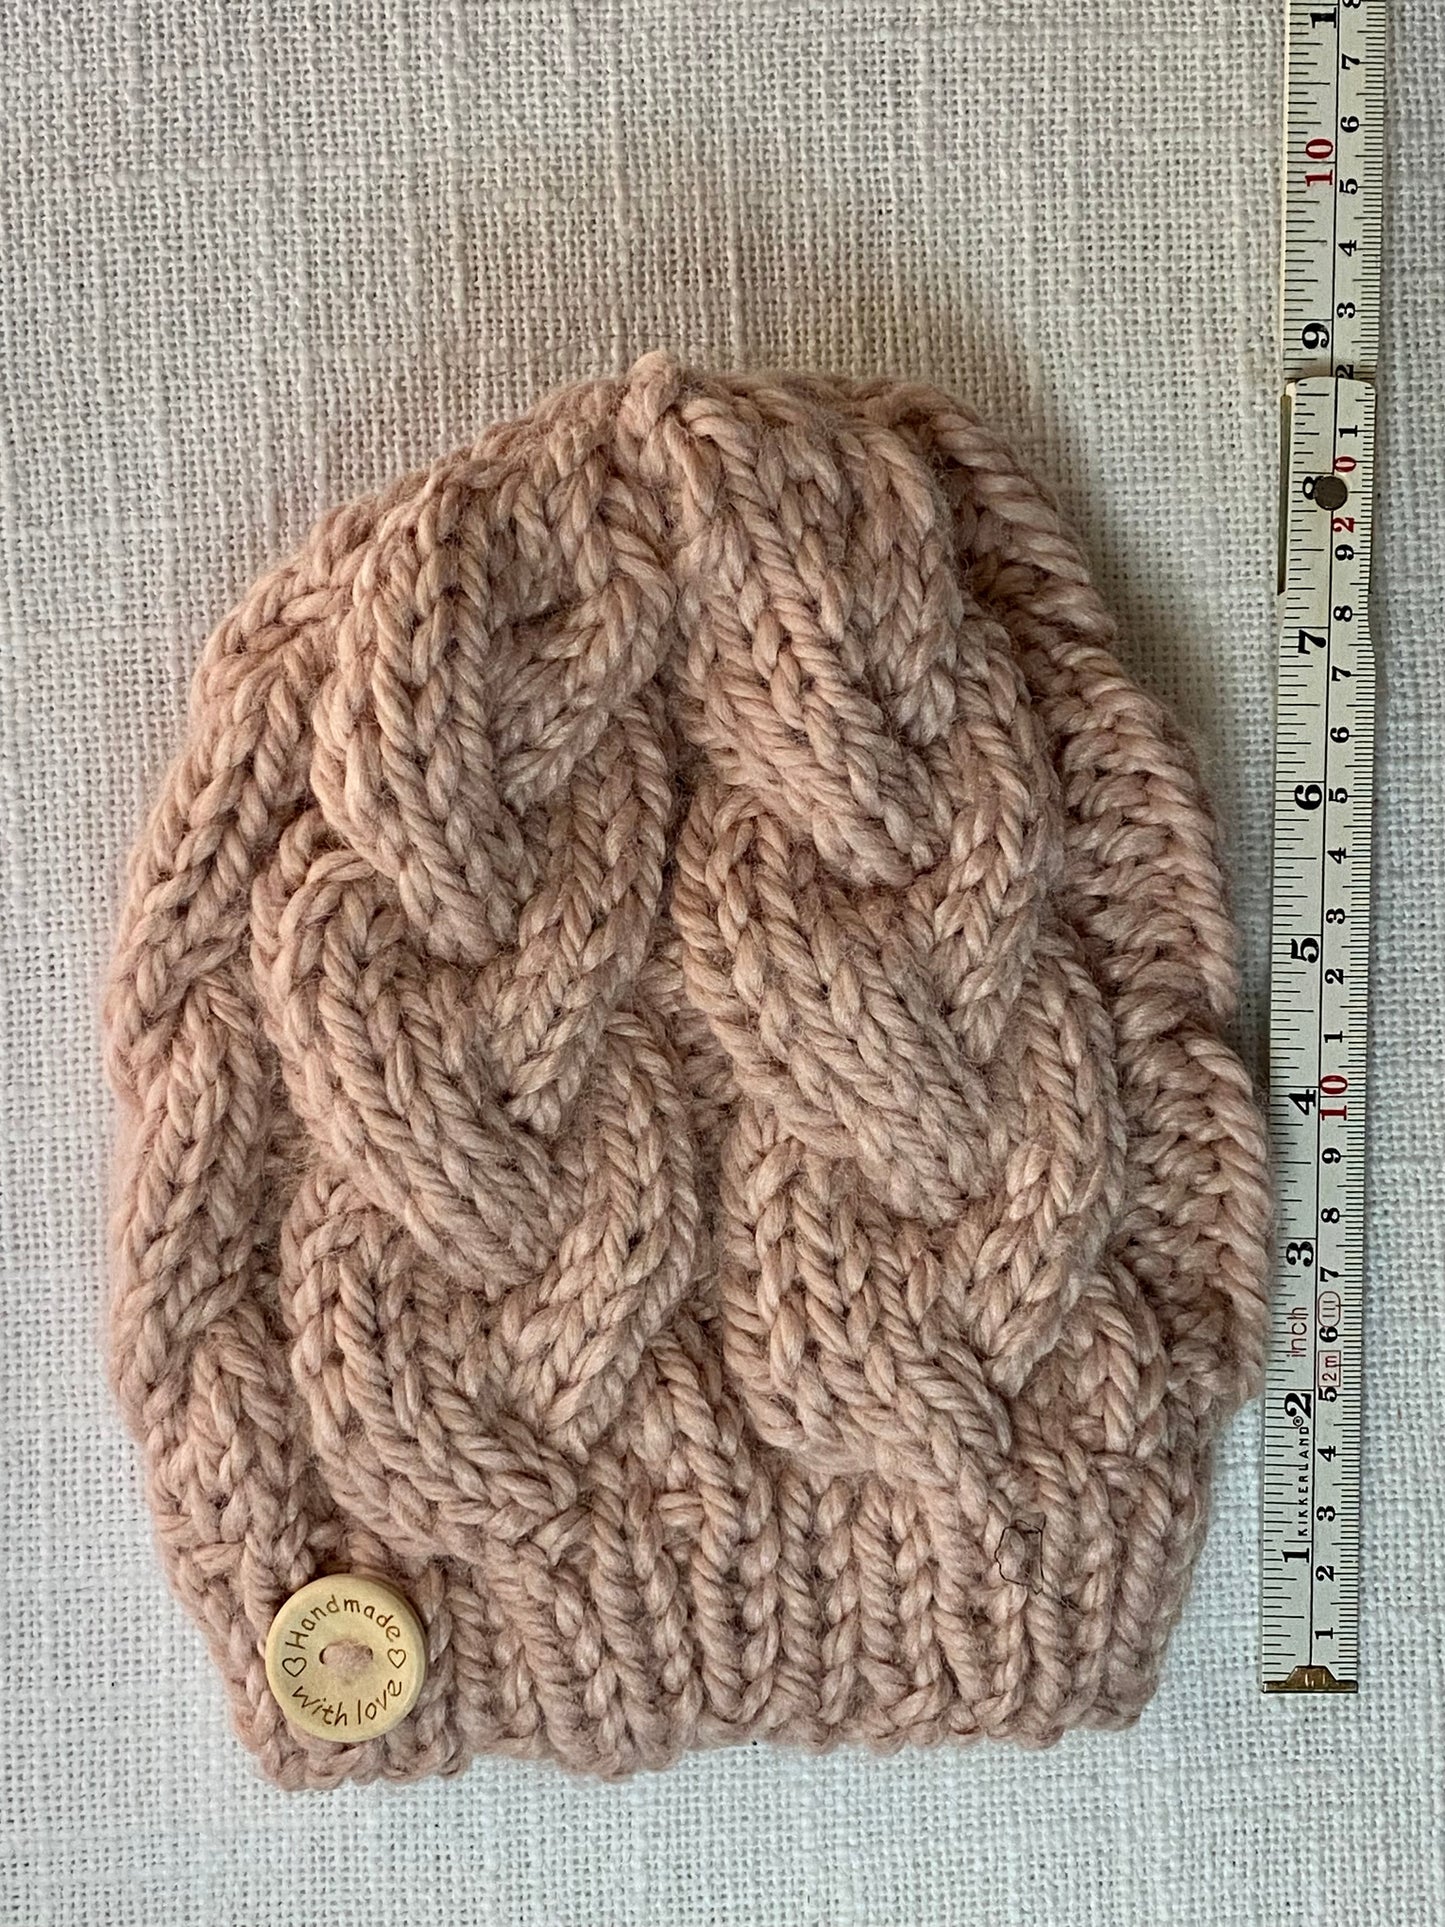 Cozy Cables Hat in Ballet Slipper Pink - Recycled Synthetic Fiber